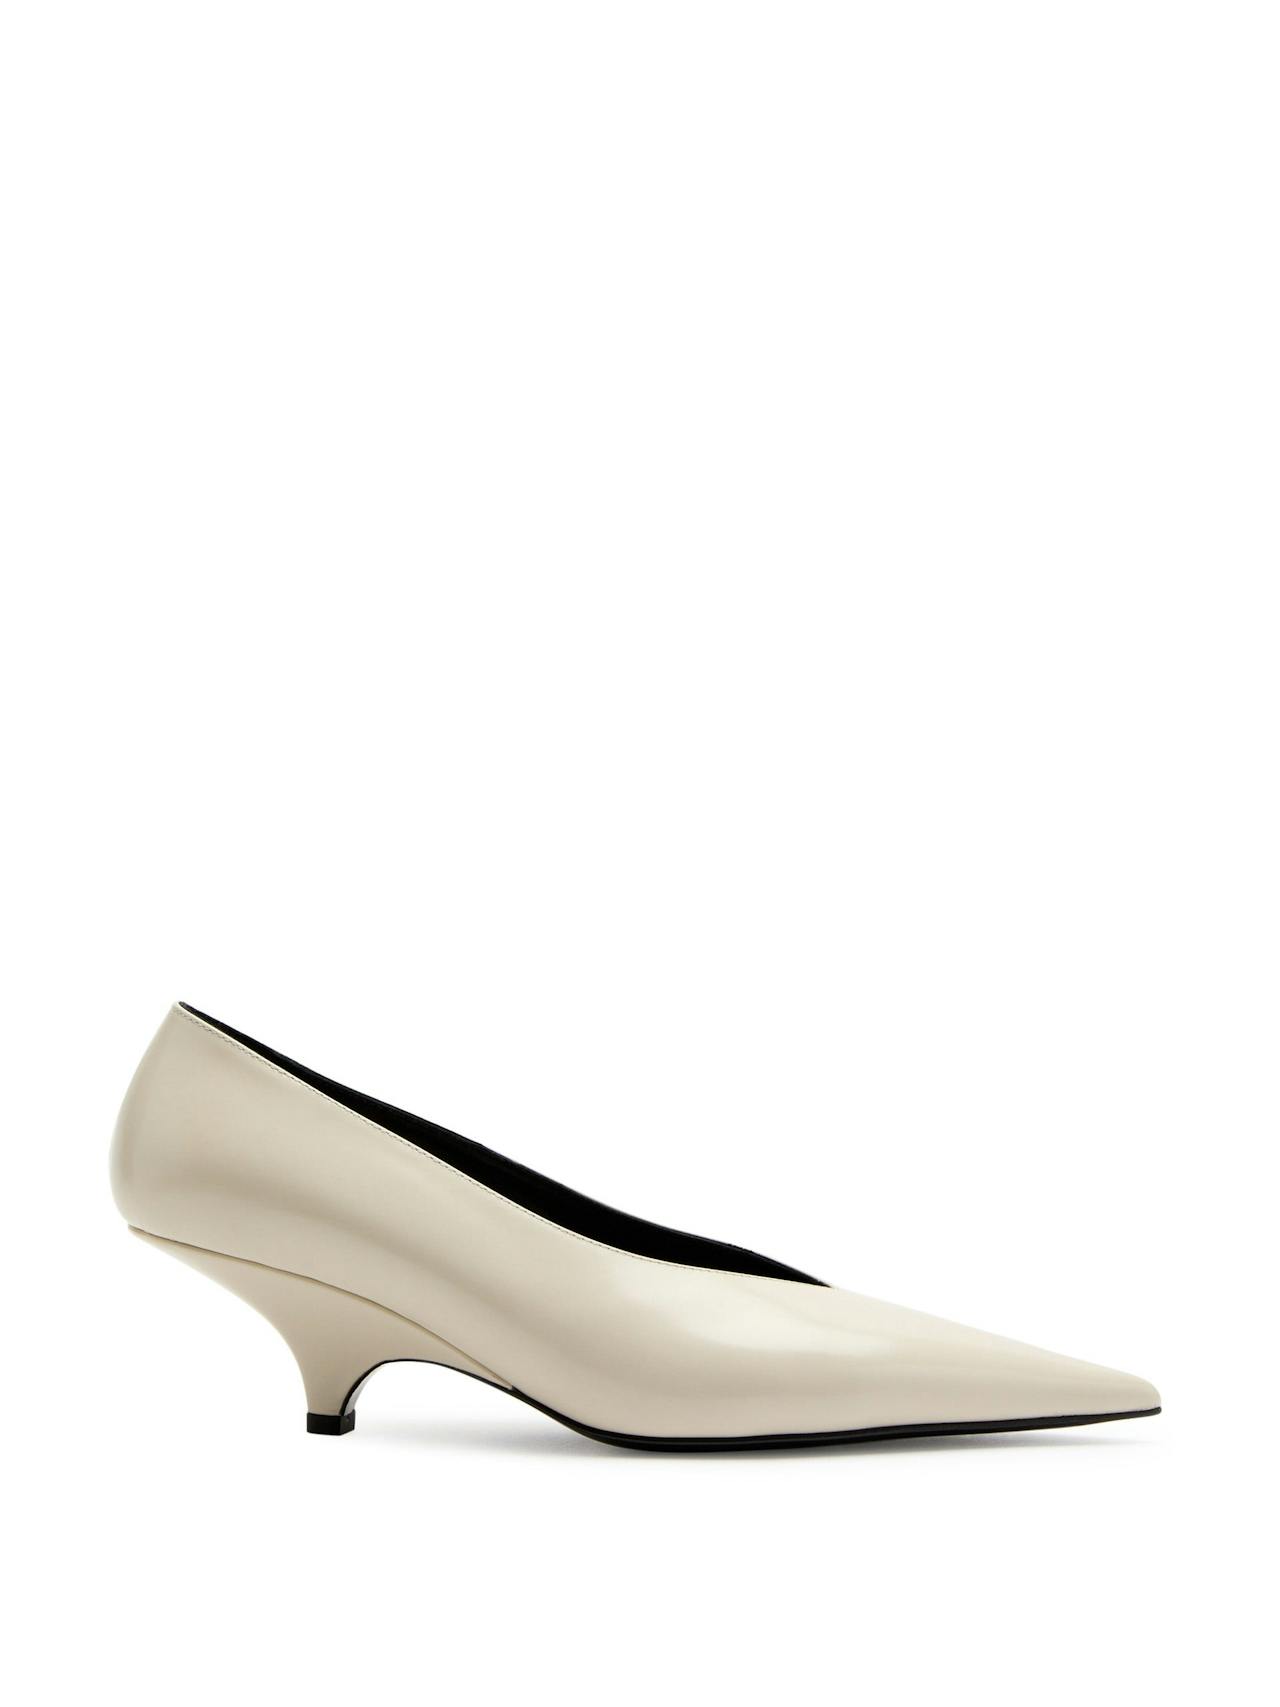 The Wedge Heel 50 leather pumps